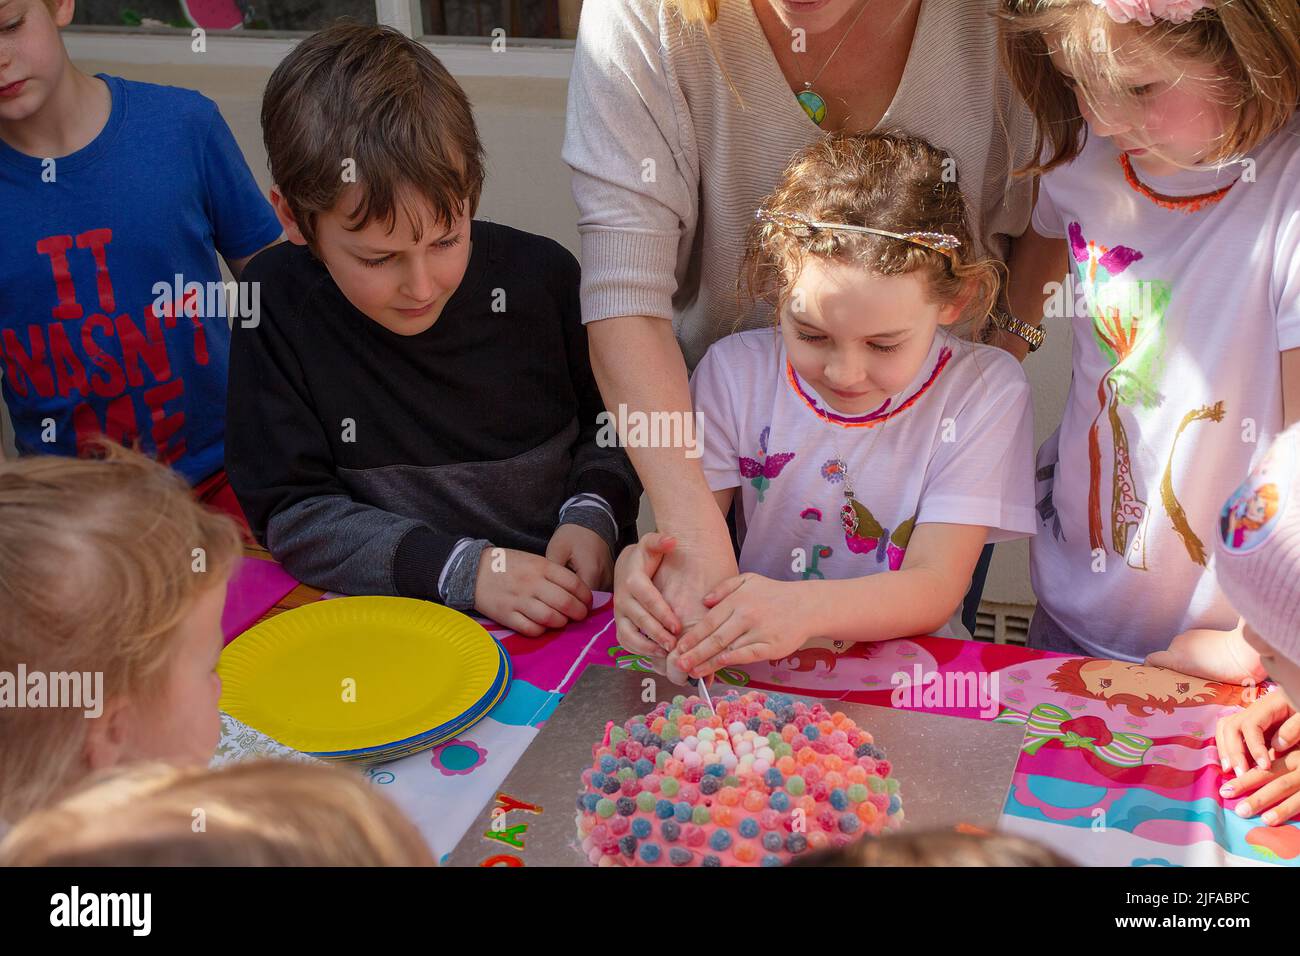 Cutting the cake at a kids birthday party Stock Photo